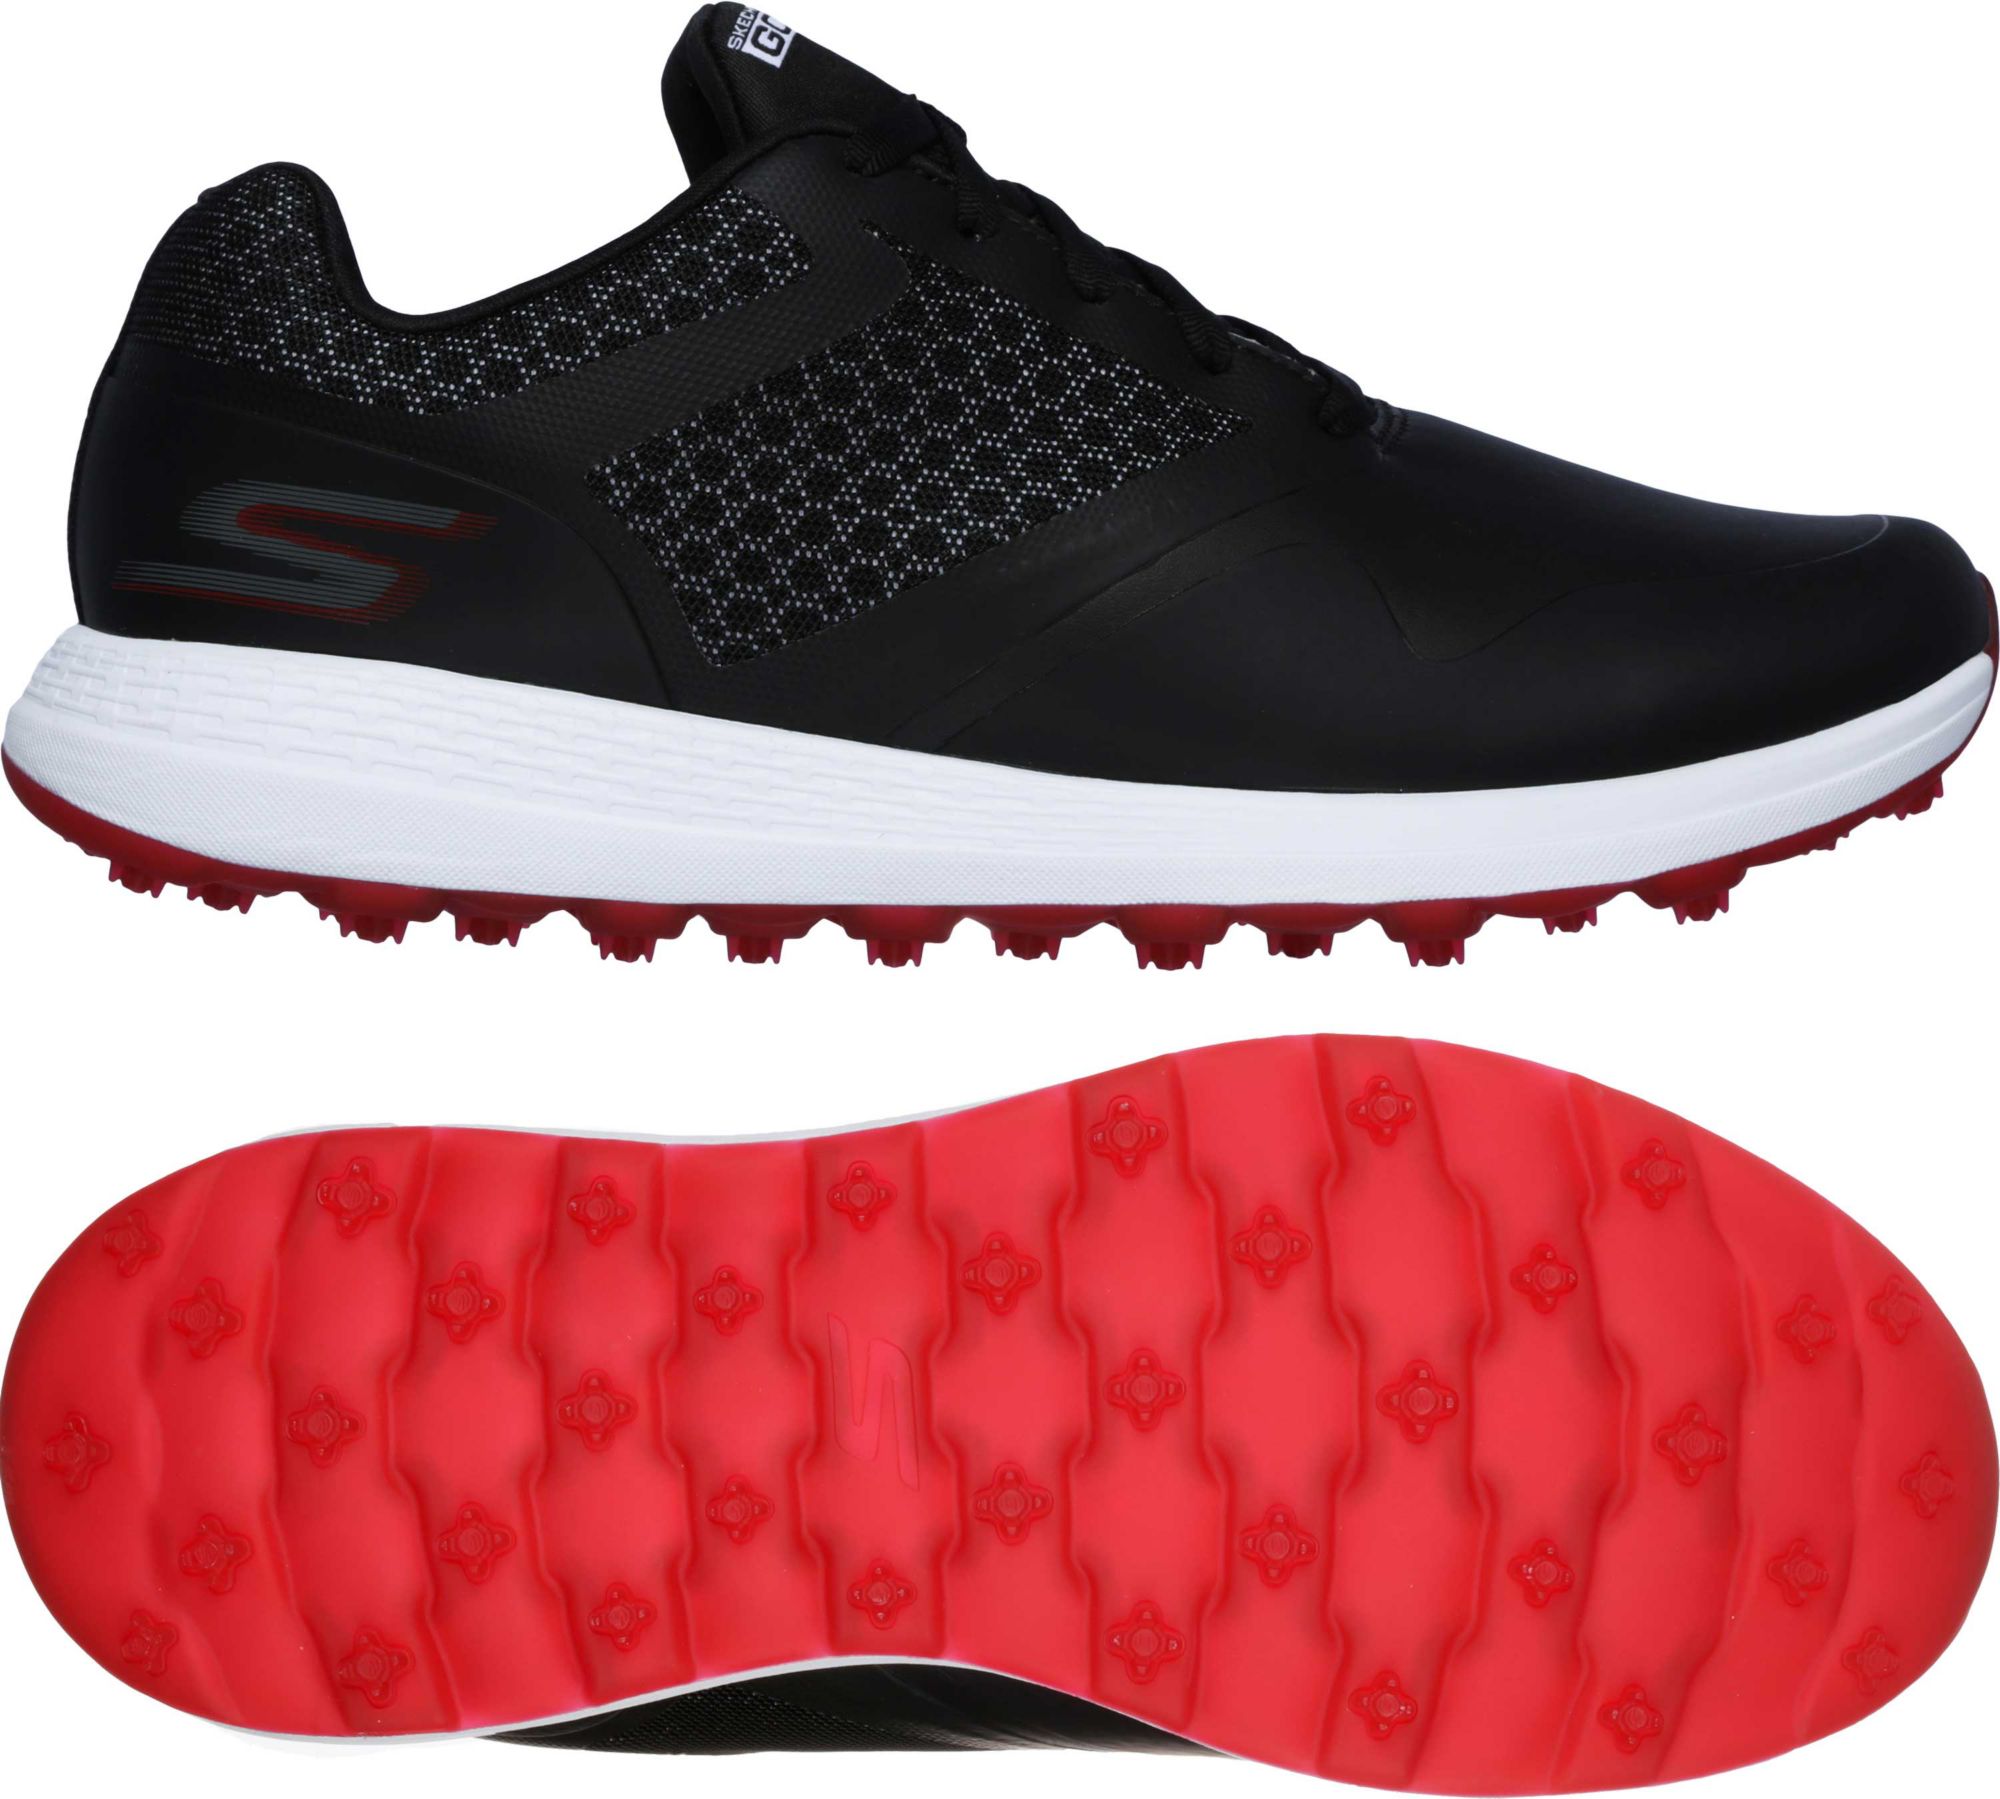 cheapest skechers golf shoes